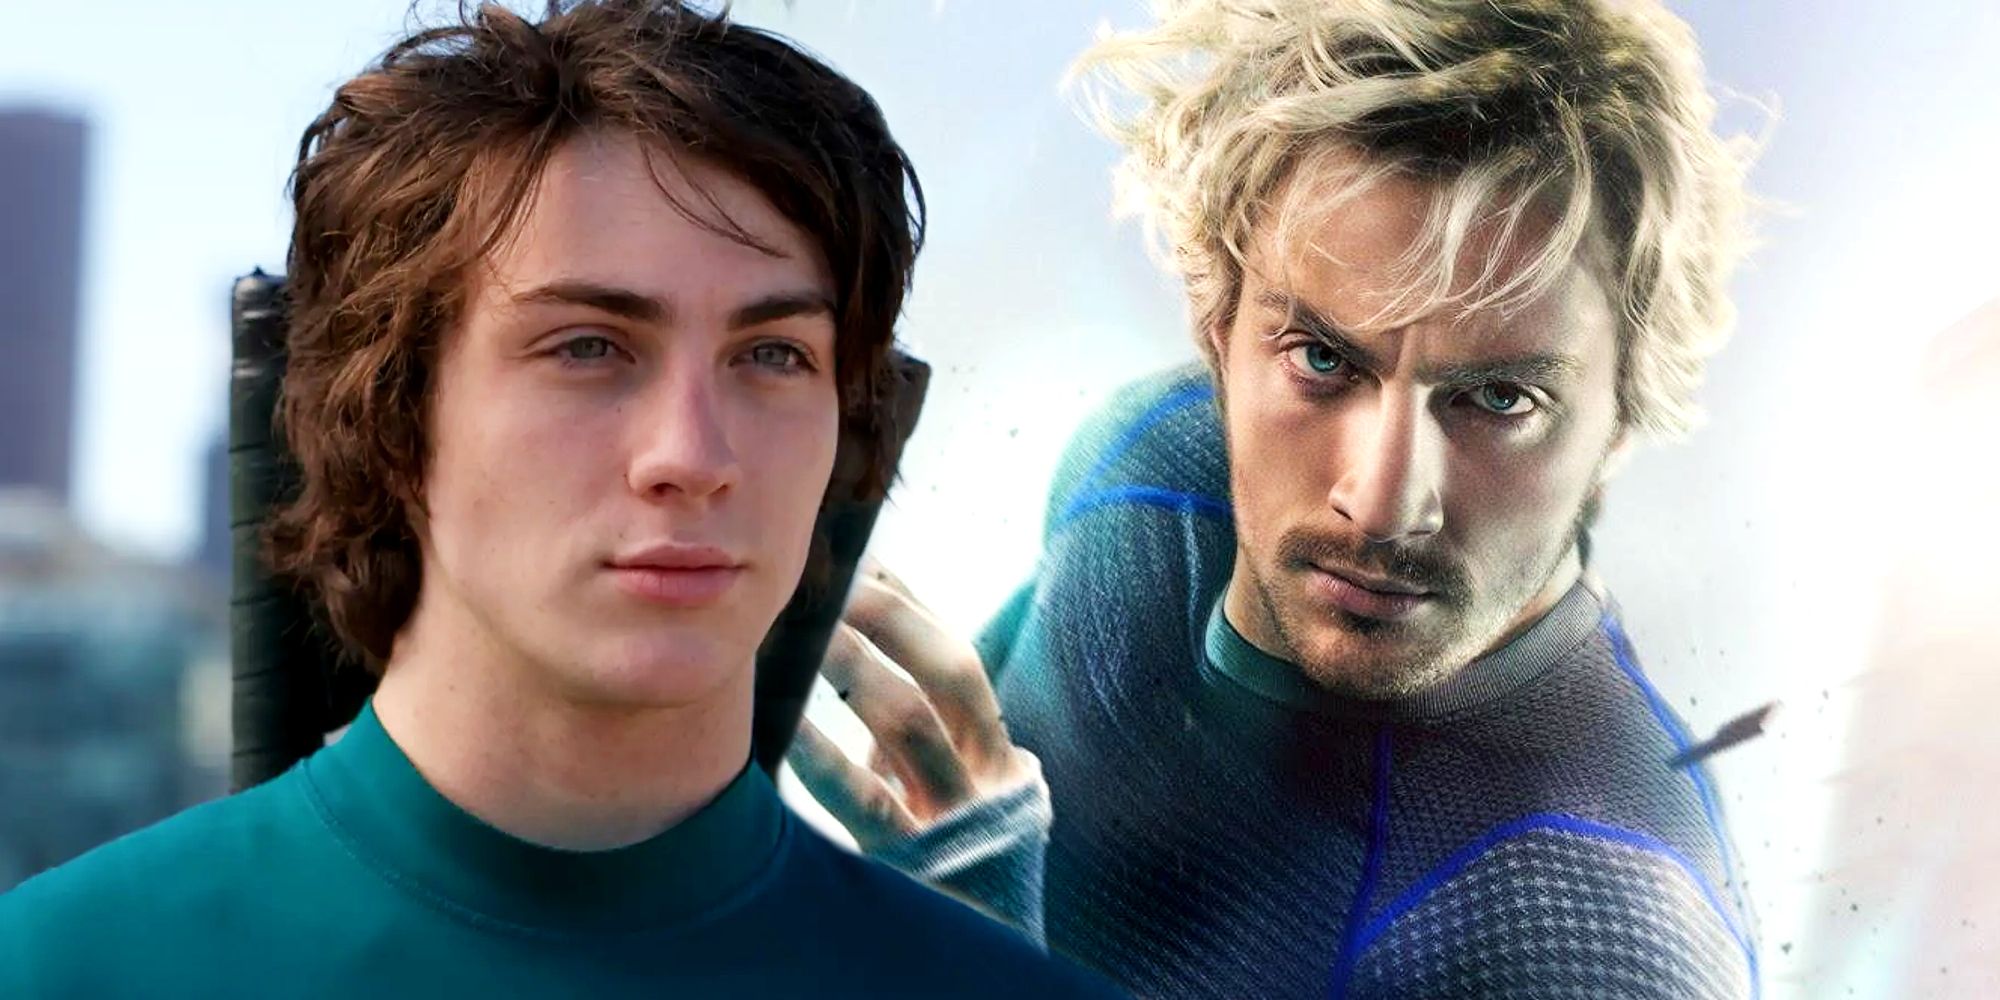 Aaron Taylor-Johnson as Dave Lizewski in Kick-Ass and Quicksilver in Avengers Age of Ultron